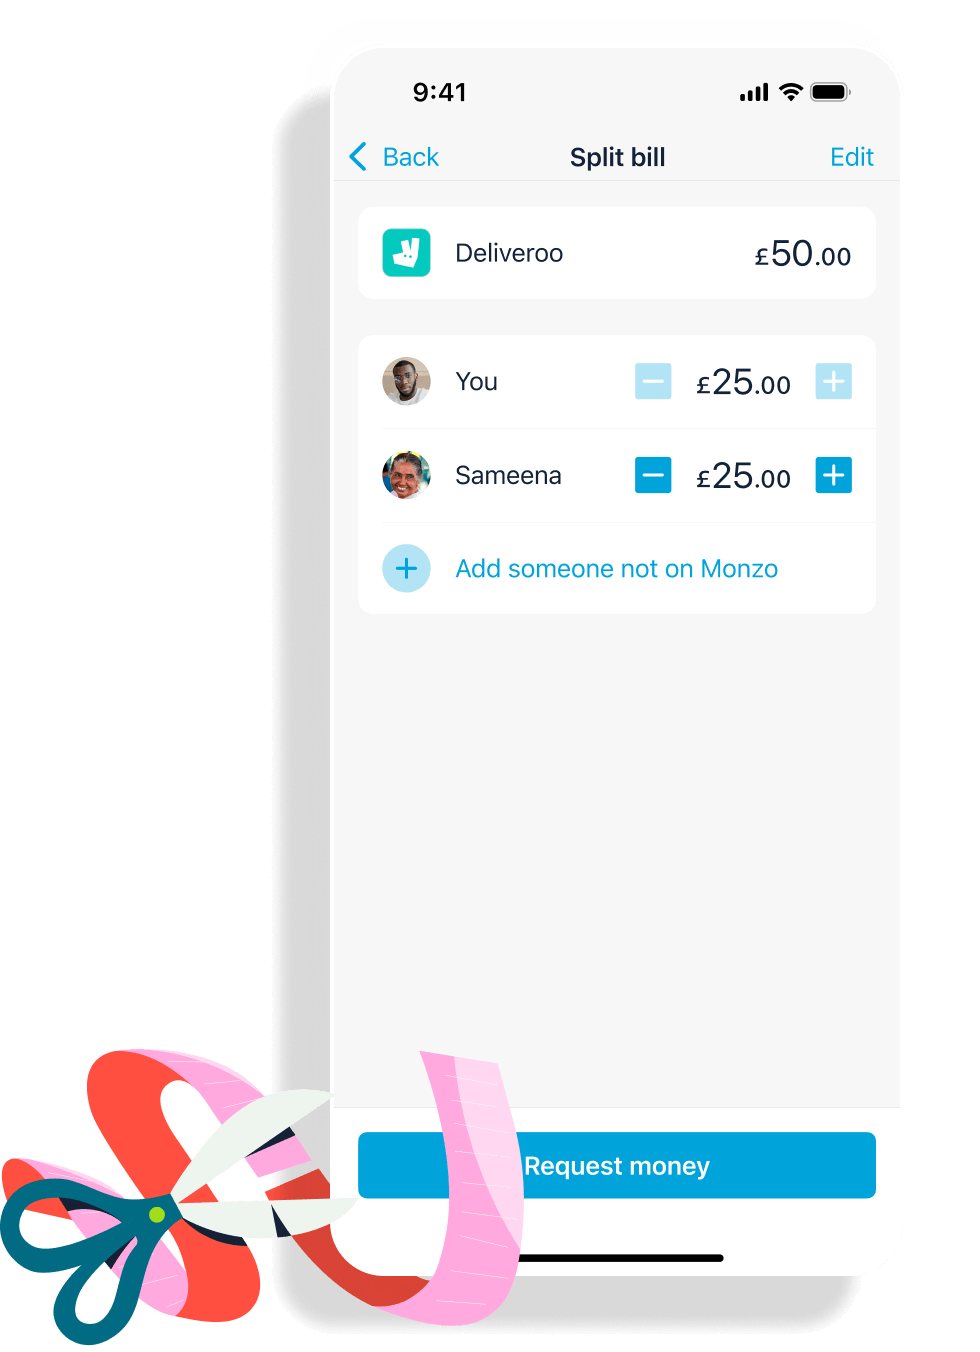 Split the bill screen showing splitting a payment to Deliveroo between 2 people.